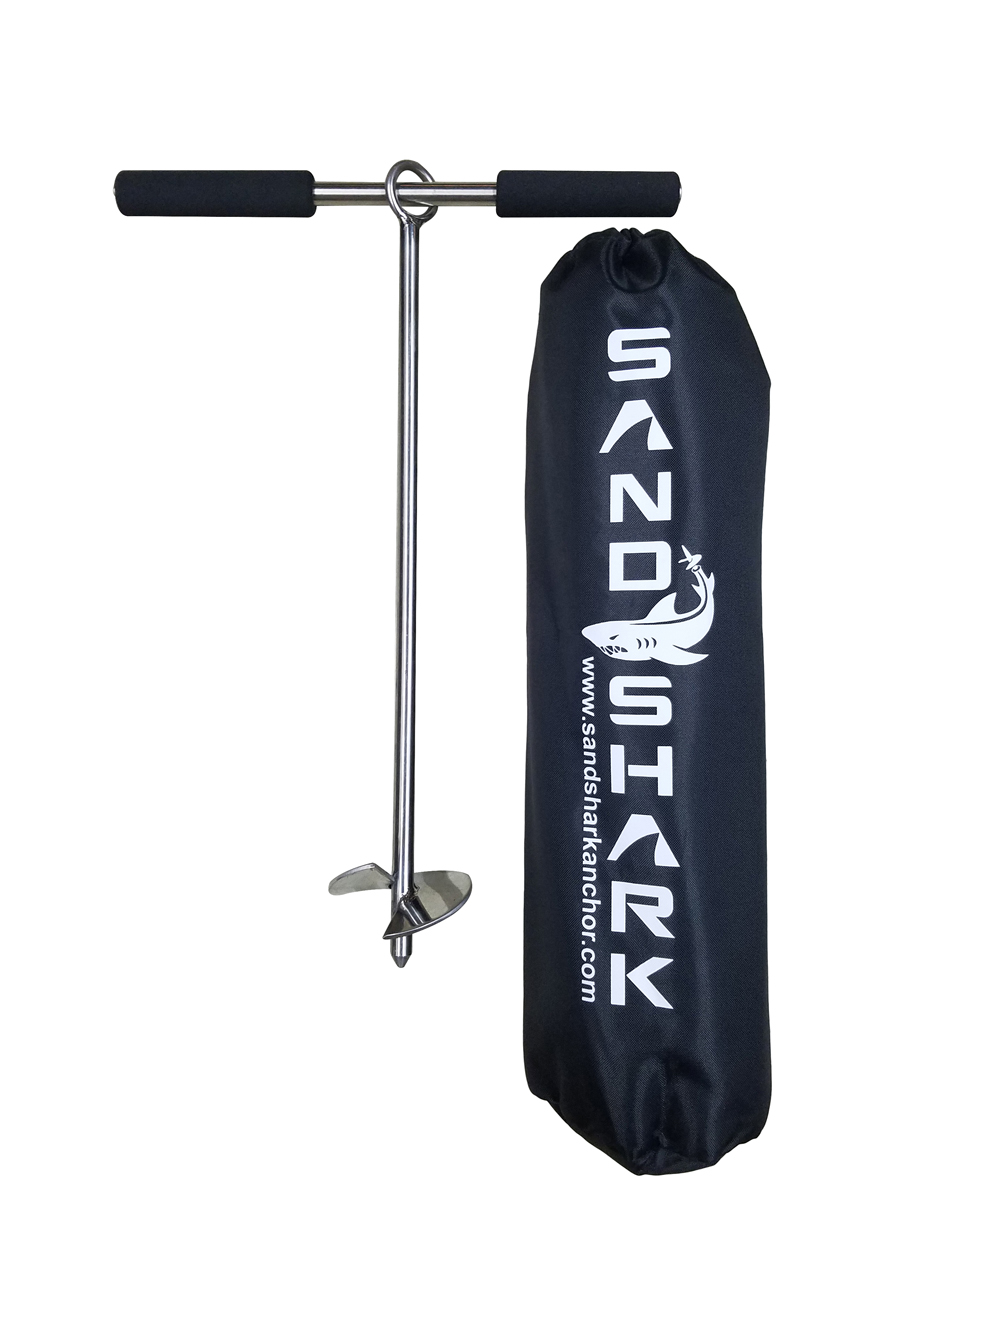 Scratch & Dent Special :: LITE 18 Sand Anchor, Tested & Proven to Hold Watercraft Secure, Auger the Stake to the Beach or Sandbar for Jet Ski, PWC, Pontoon, Kayak, Canoe. (Stainless Steel) 18 Inch with Padded Case by SandShark.